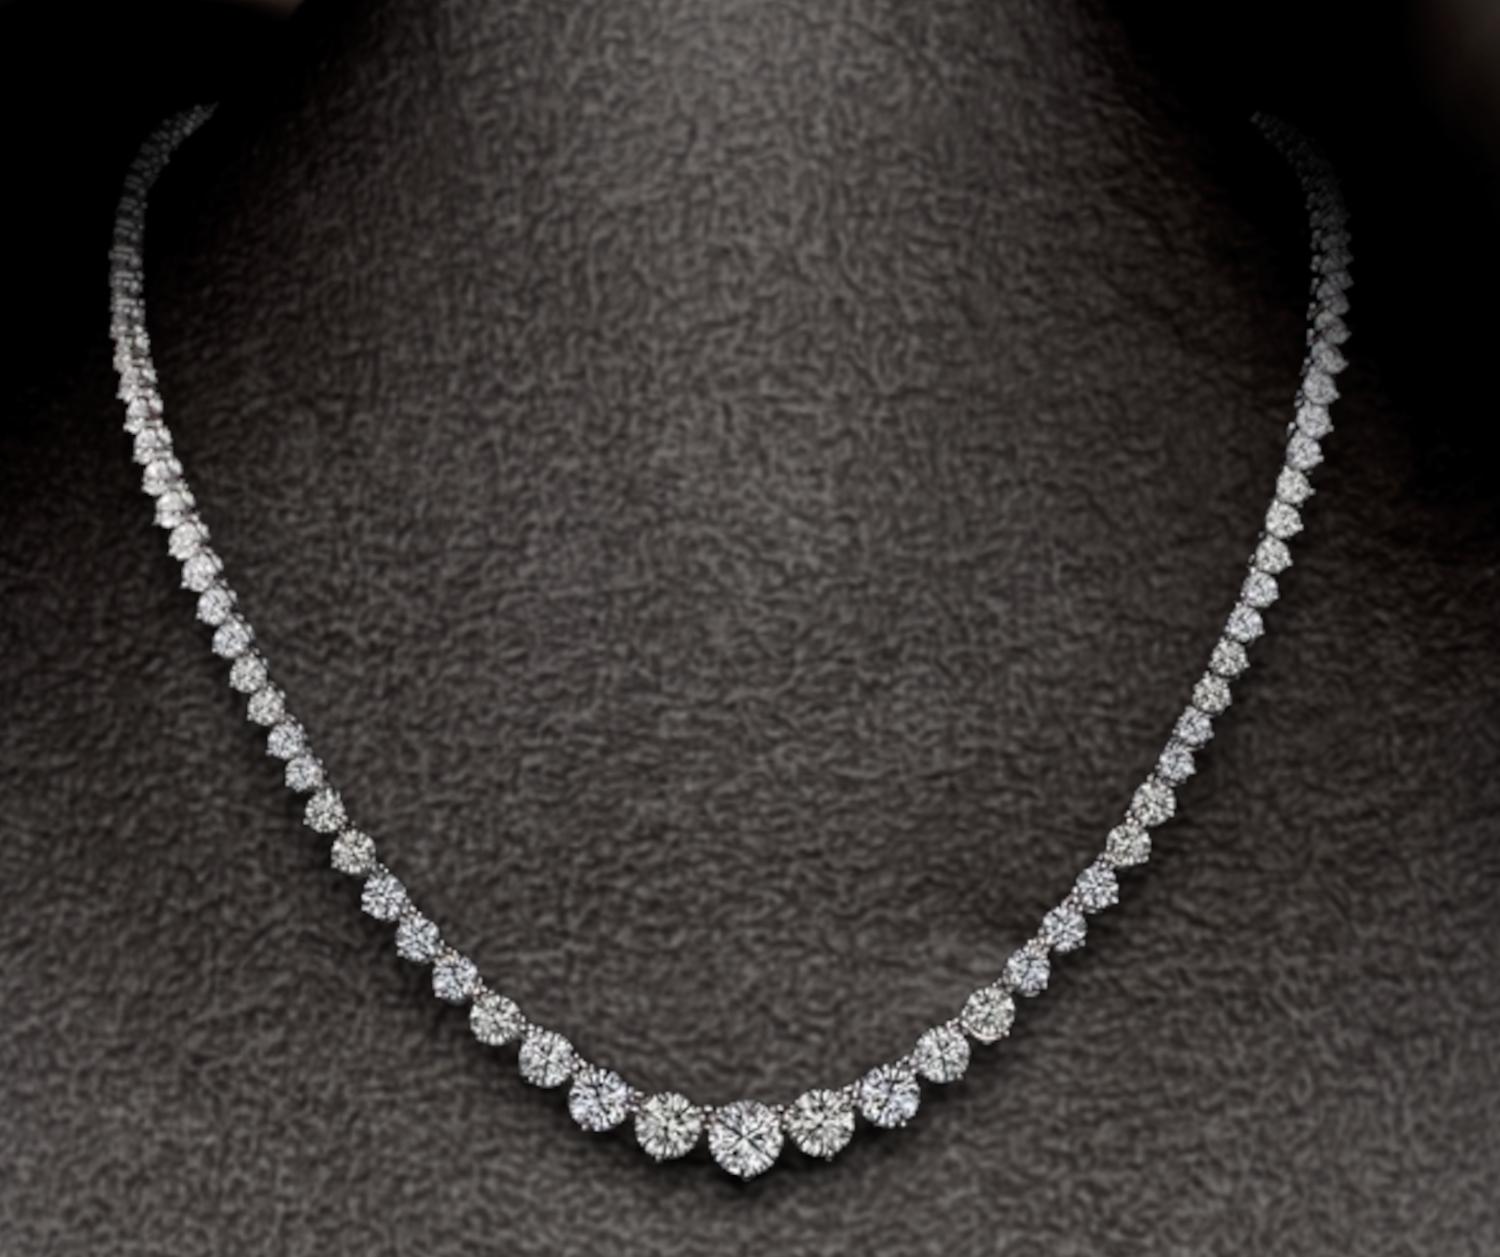 Riviera Neck.  16.60 carats long 16.3 inches approximately